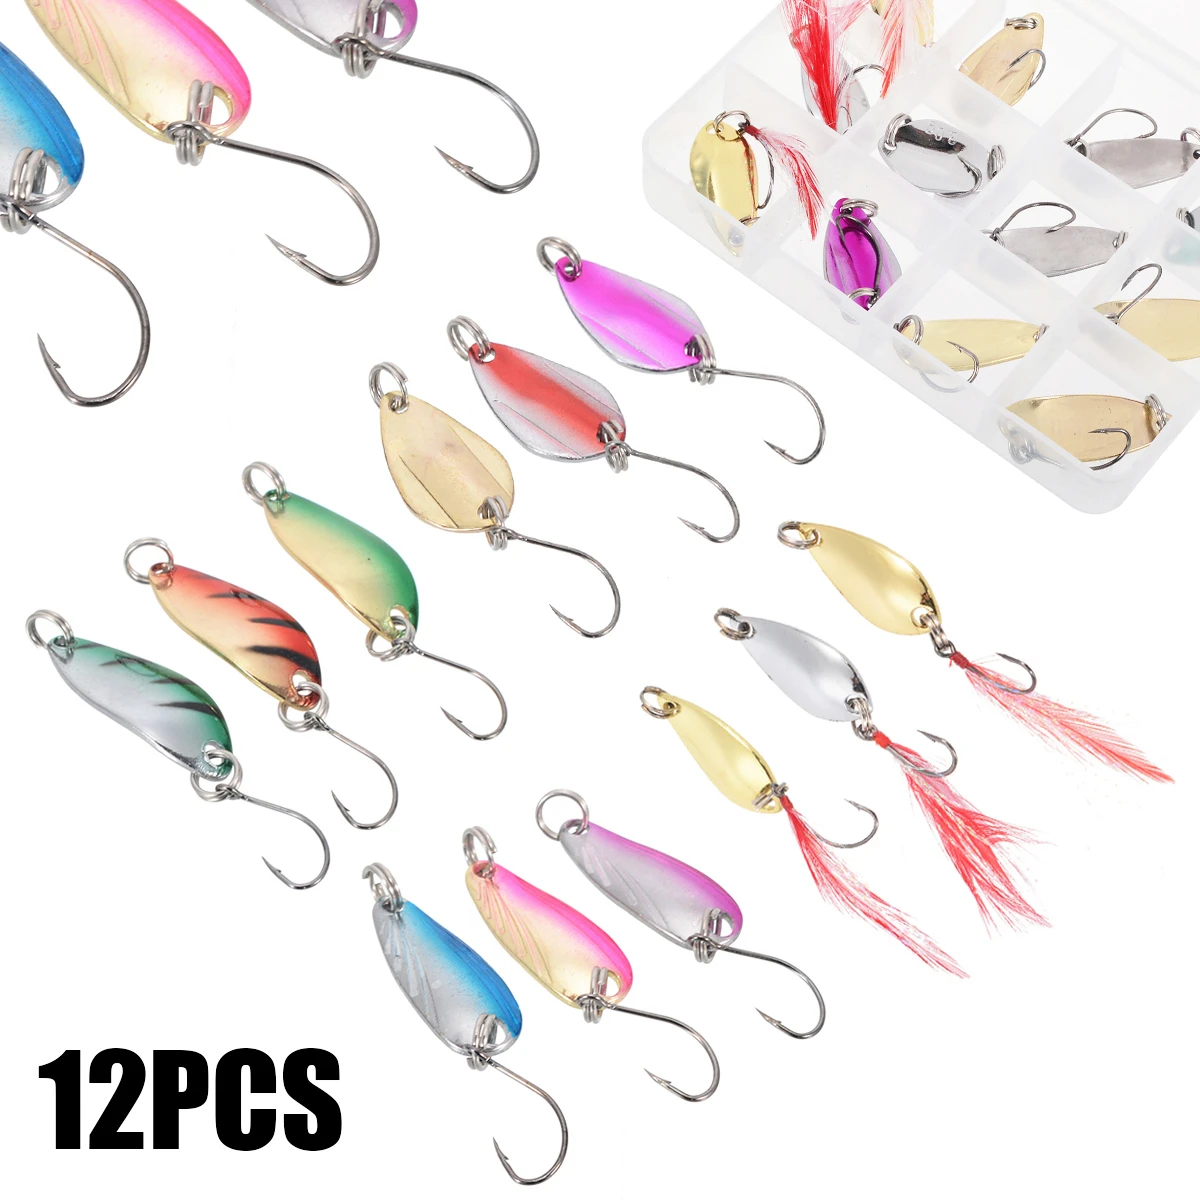 12Pcs Spinnerbait Fishing Lures Hard Metal Spinner Bait Tackle Accessories 